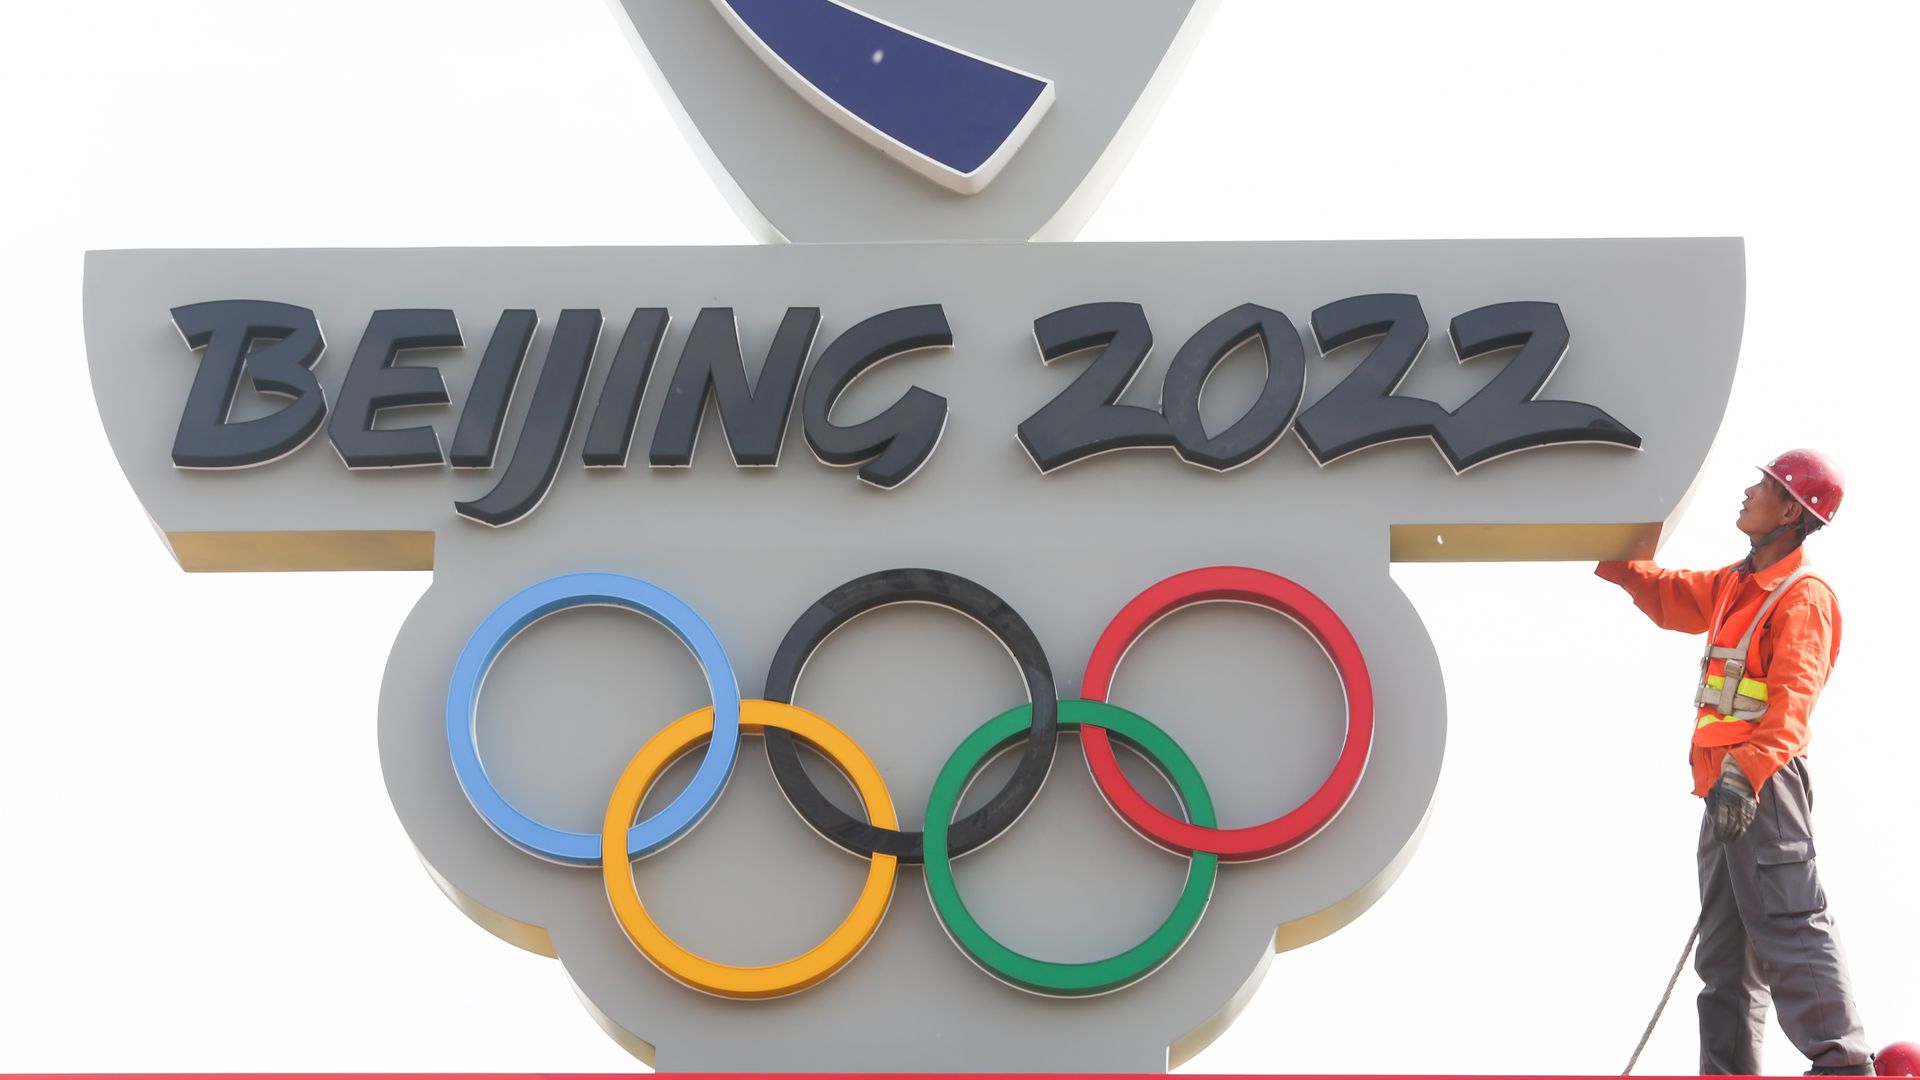 Photo of a countdown board that reads "Beijing 2022" with a construction worker on the side 